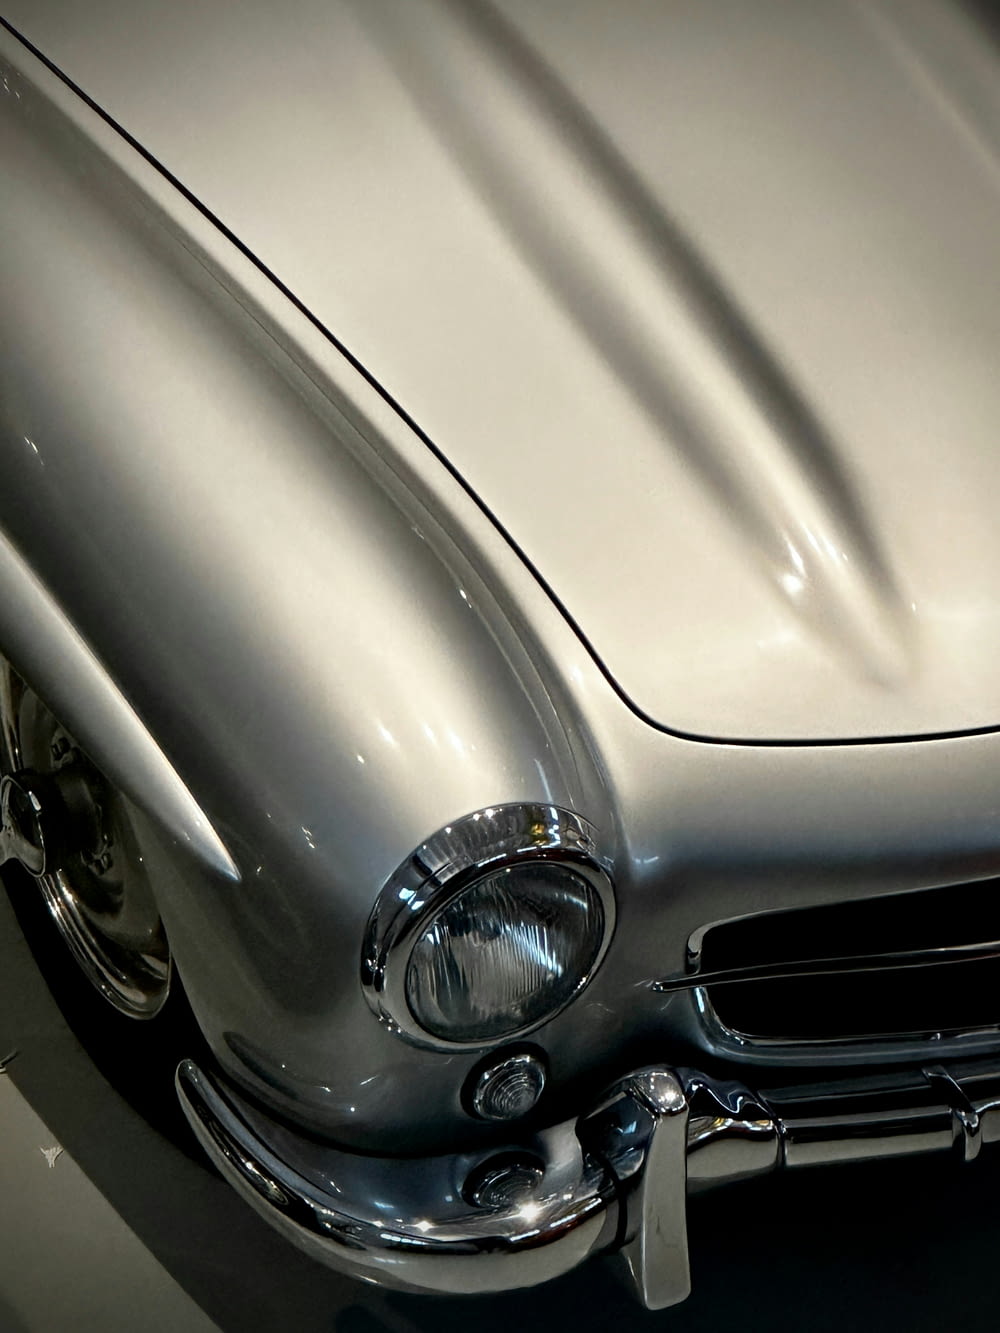 a silver classic car parked in a garage